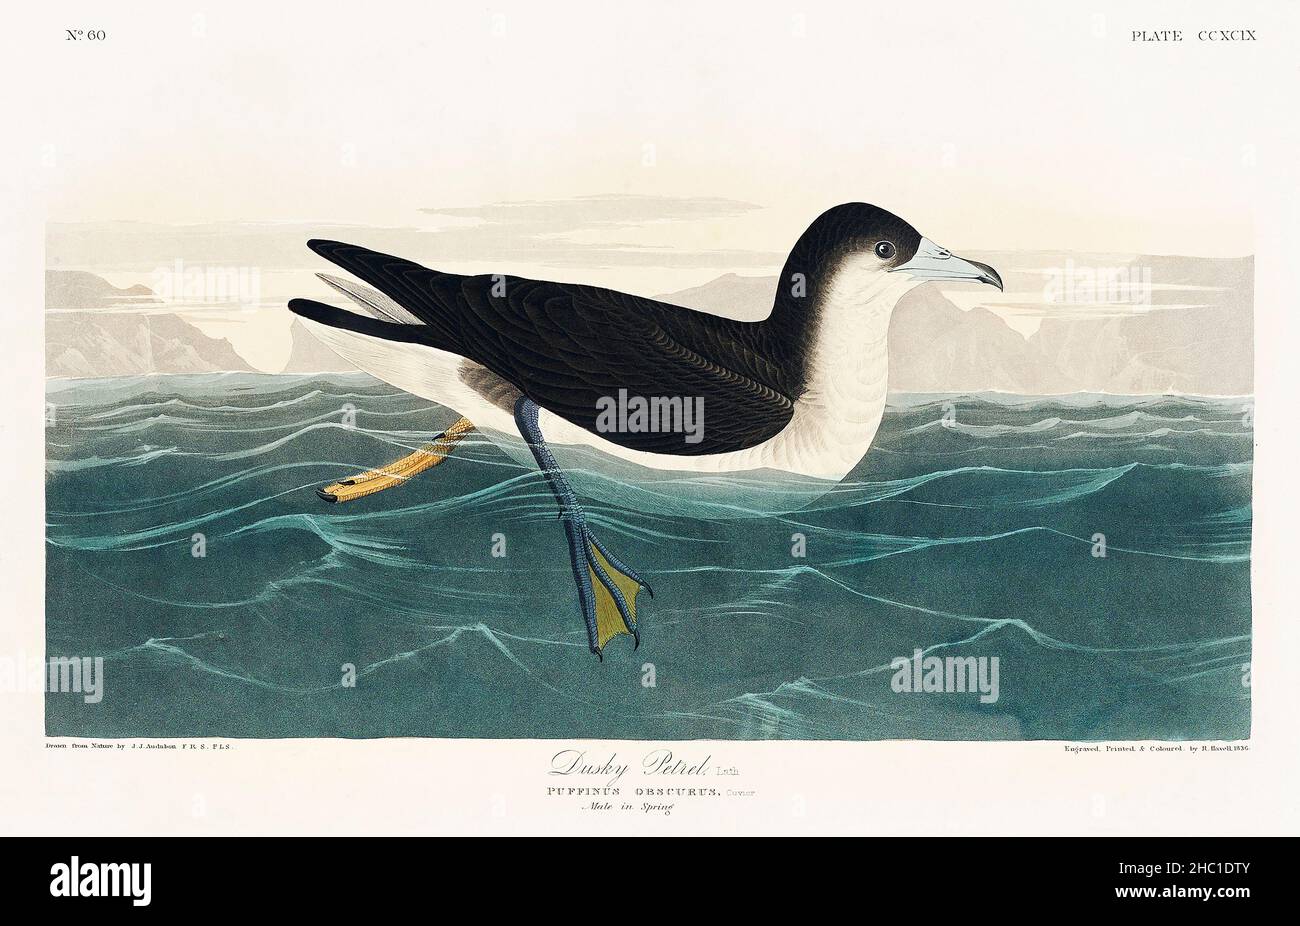 Dusky Petrel from Birds of America (1827) by John James Audubon (1785 - 1851), etched by Robert Havell (1793 - 1878). Stock Photo